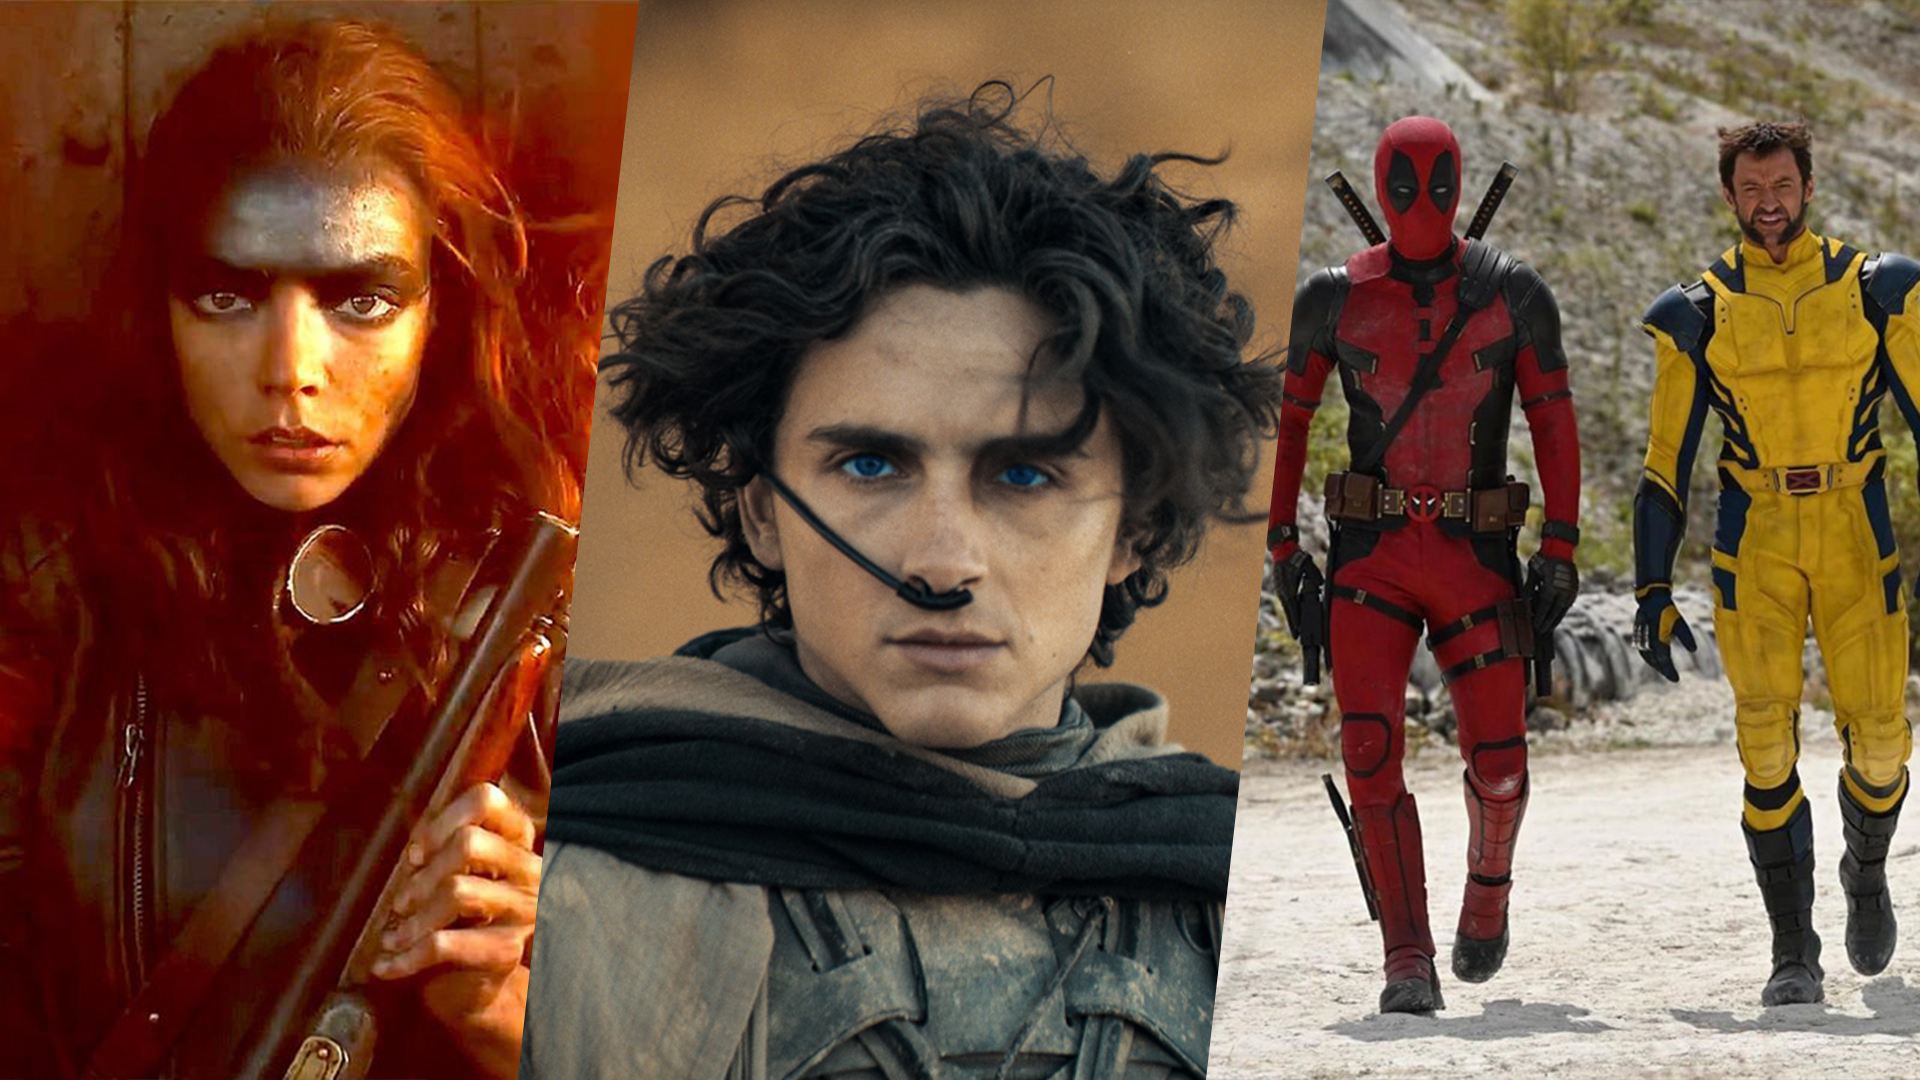 From Deadpool 3 to Gladiator 2, these are the 18 epic movies I can't